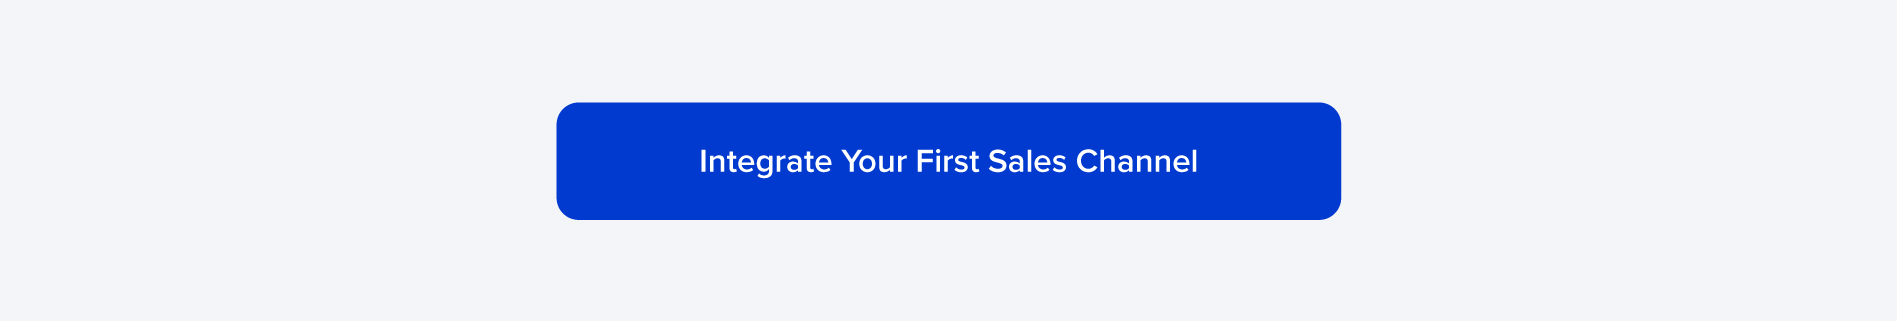 Integrate your first sales with eSwap